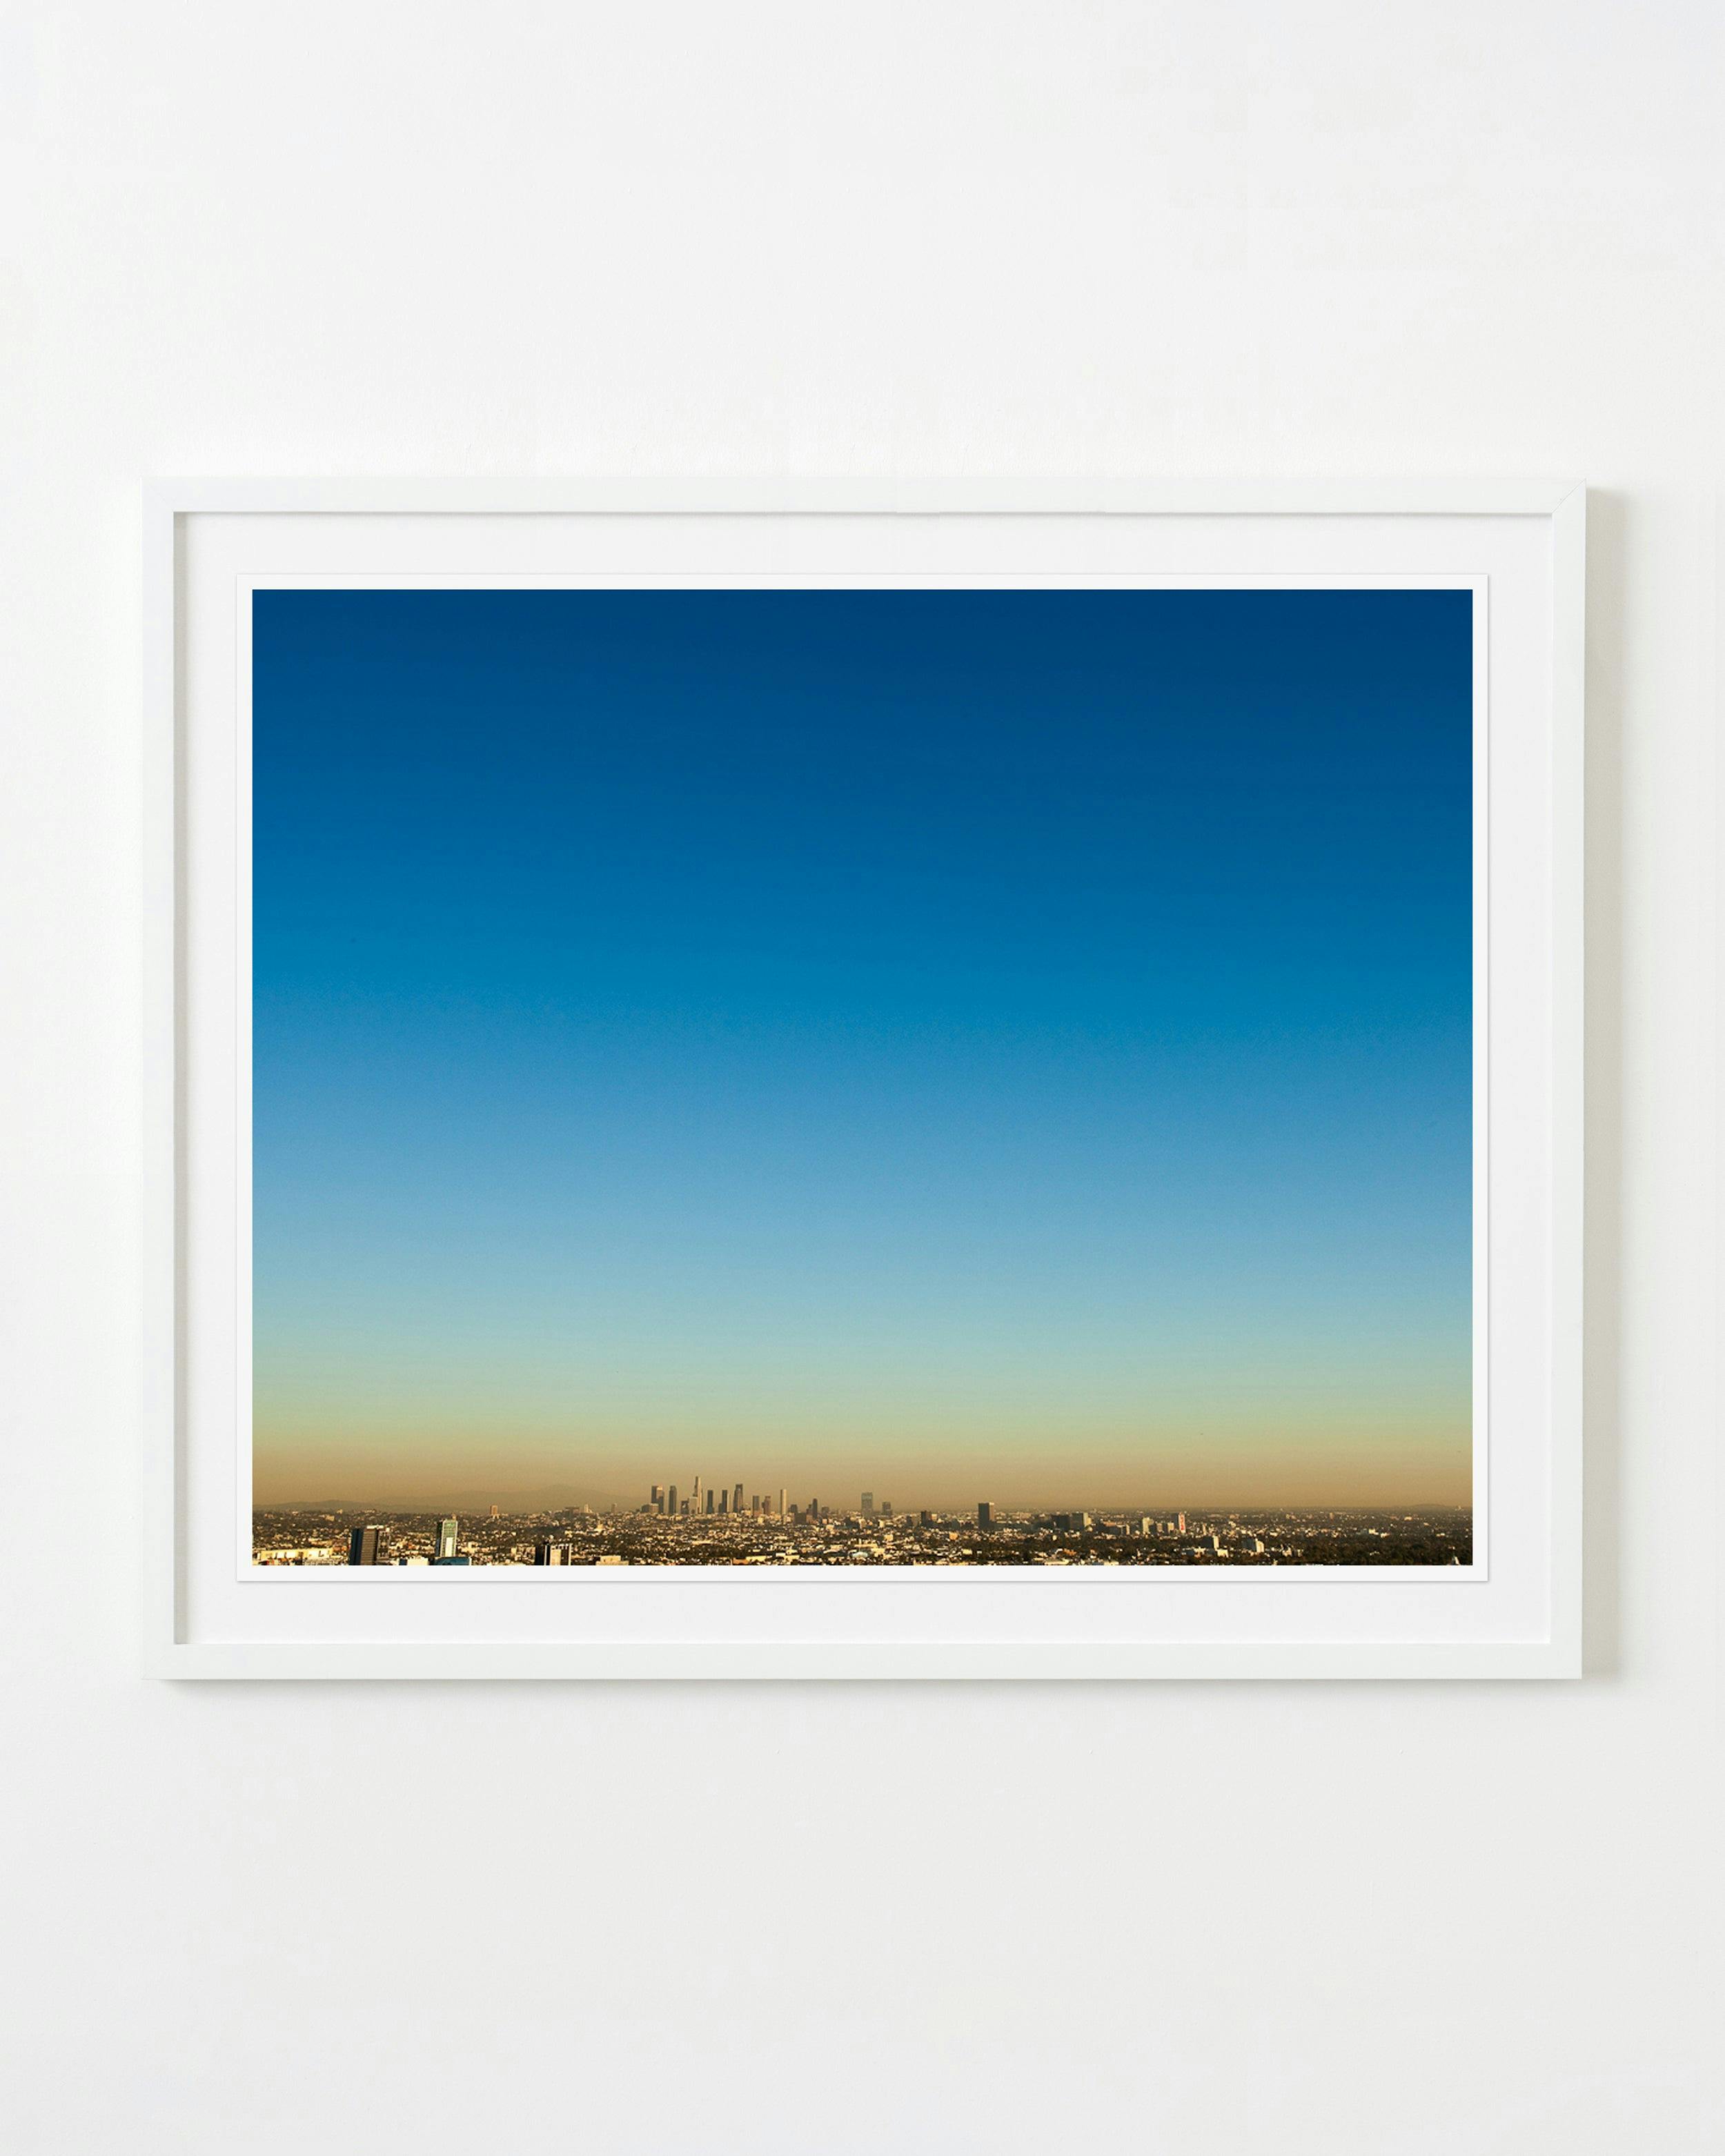 Photography by Ashok Sinha titled "Los Angeles, California".